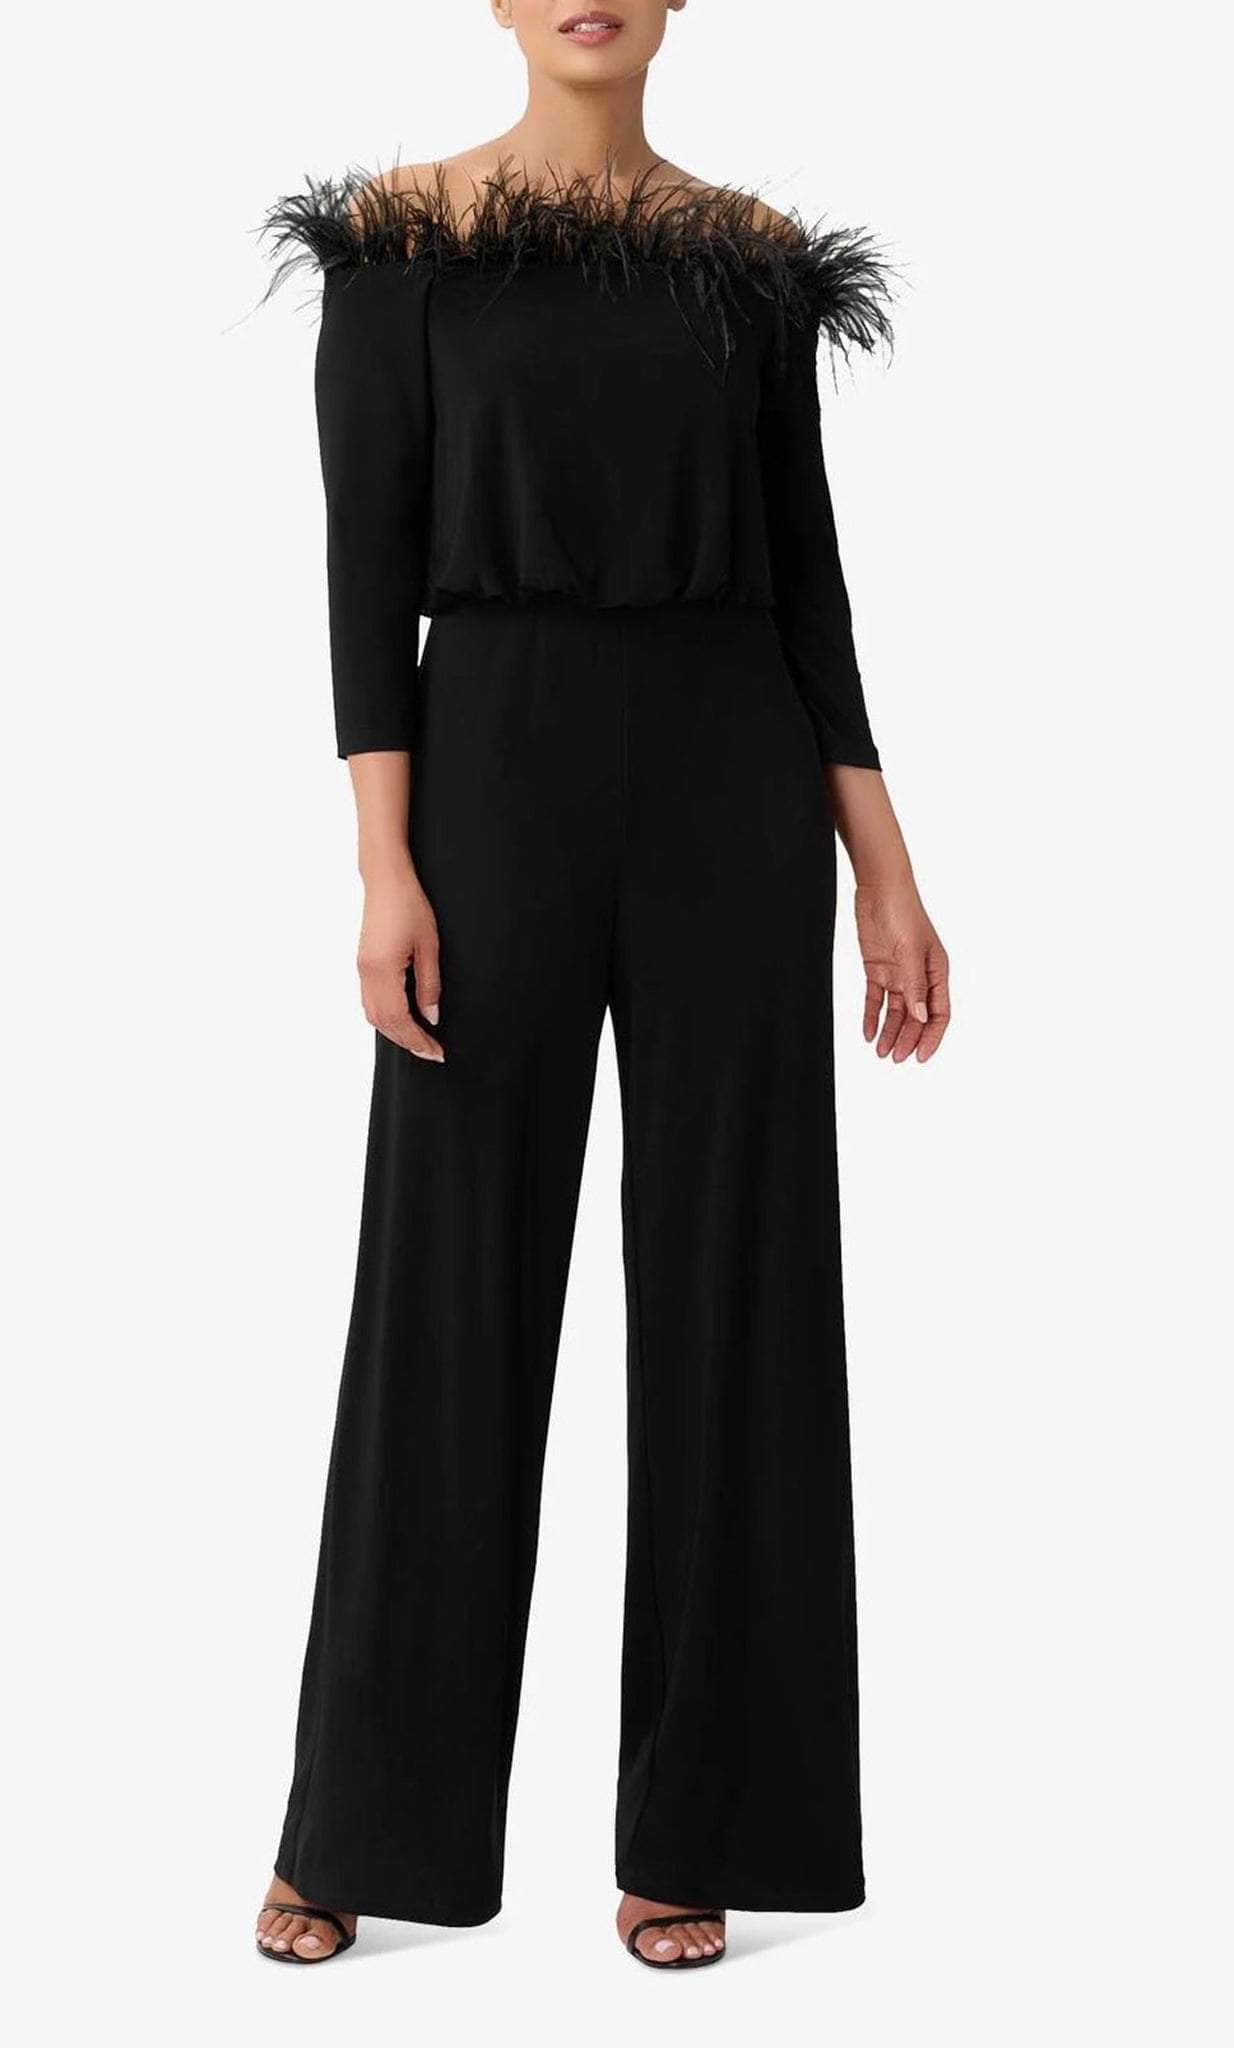 Adrianna Papell AP1E210212 - Feather Trimmed Jumpsuit Formal Pantsuits